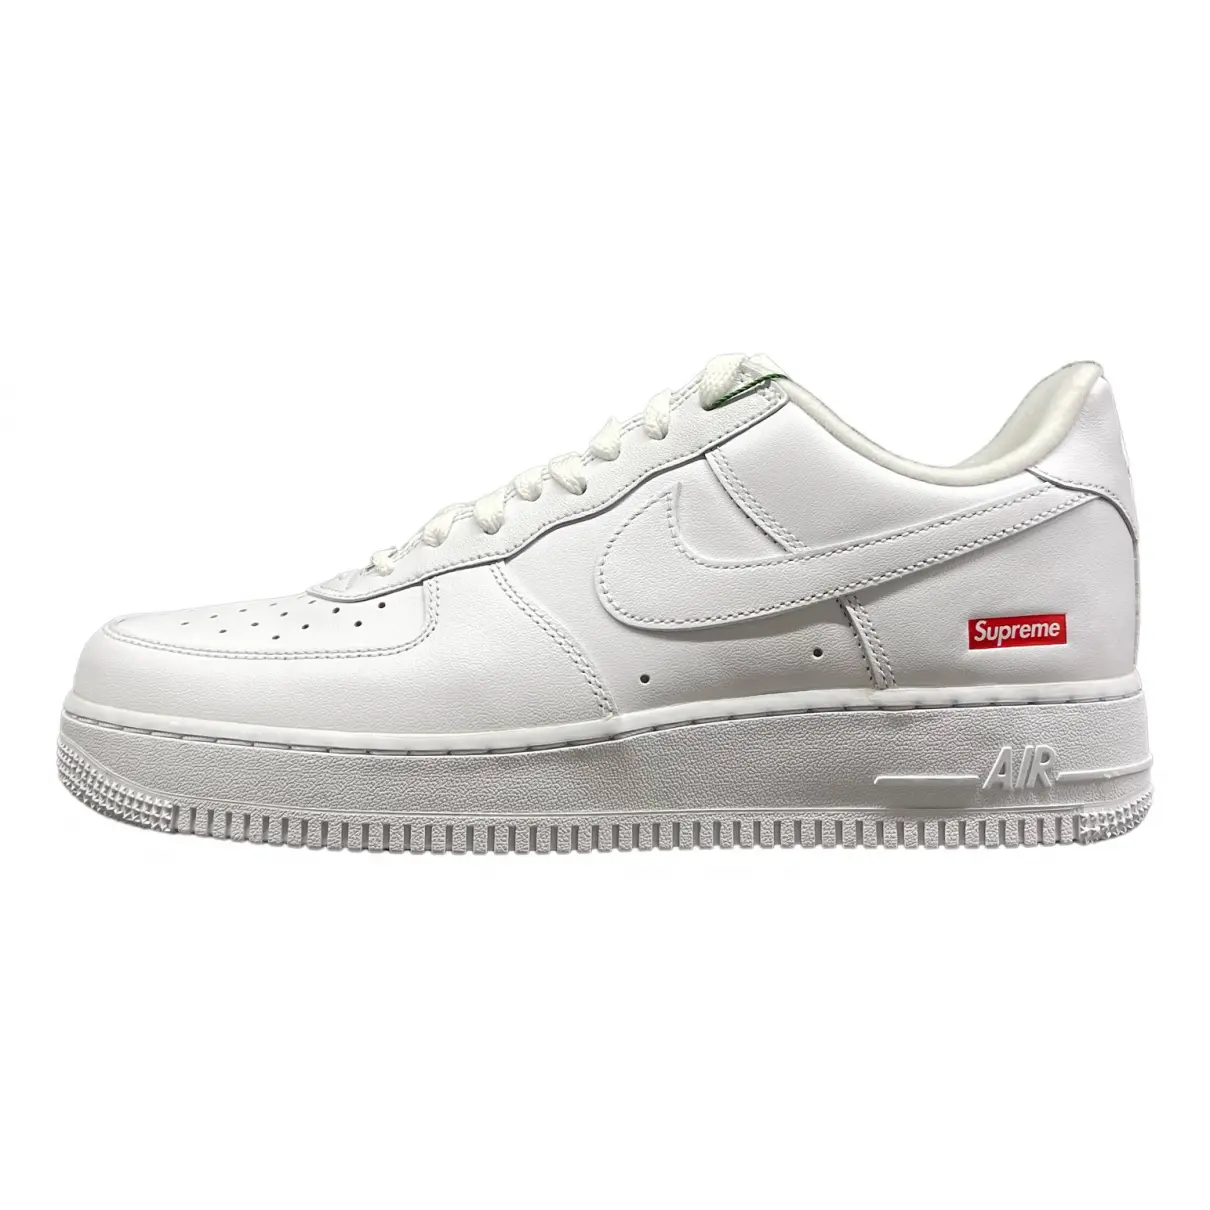 Air Force 1 leather low trainers Nike x Supreme